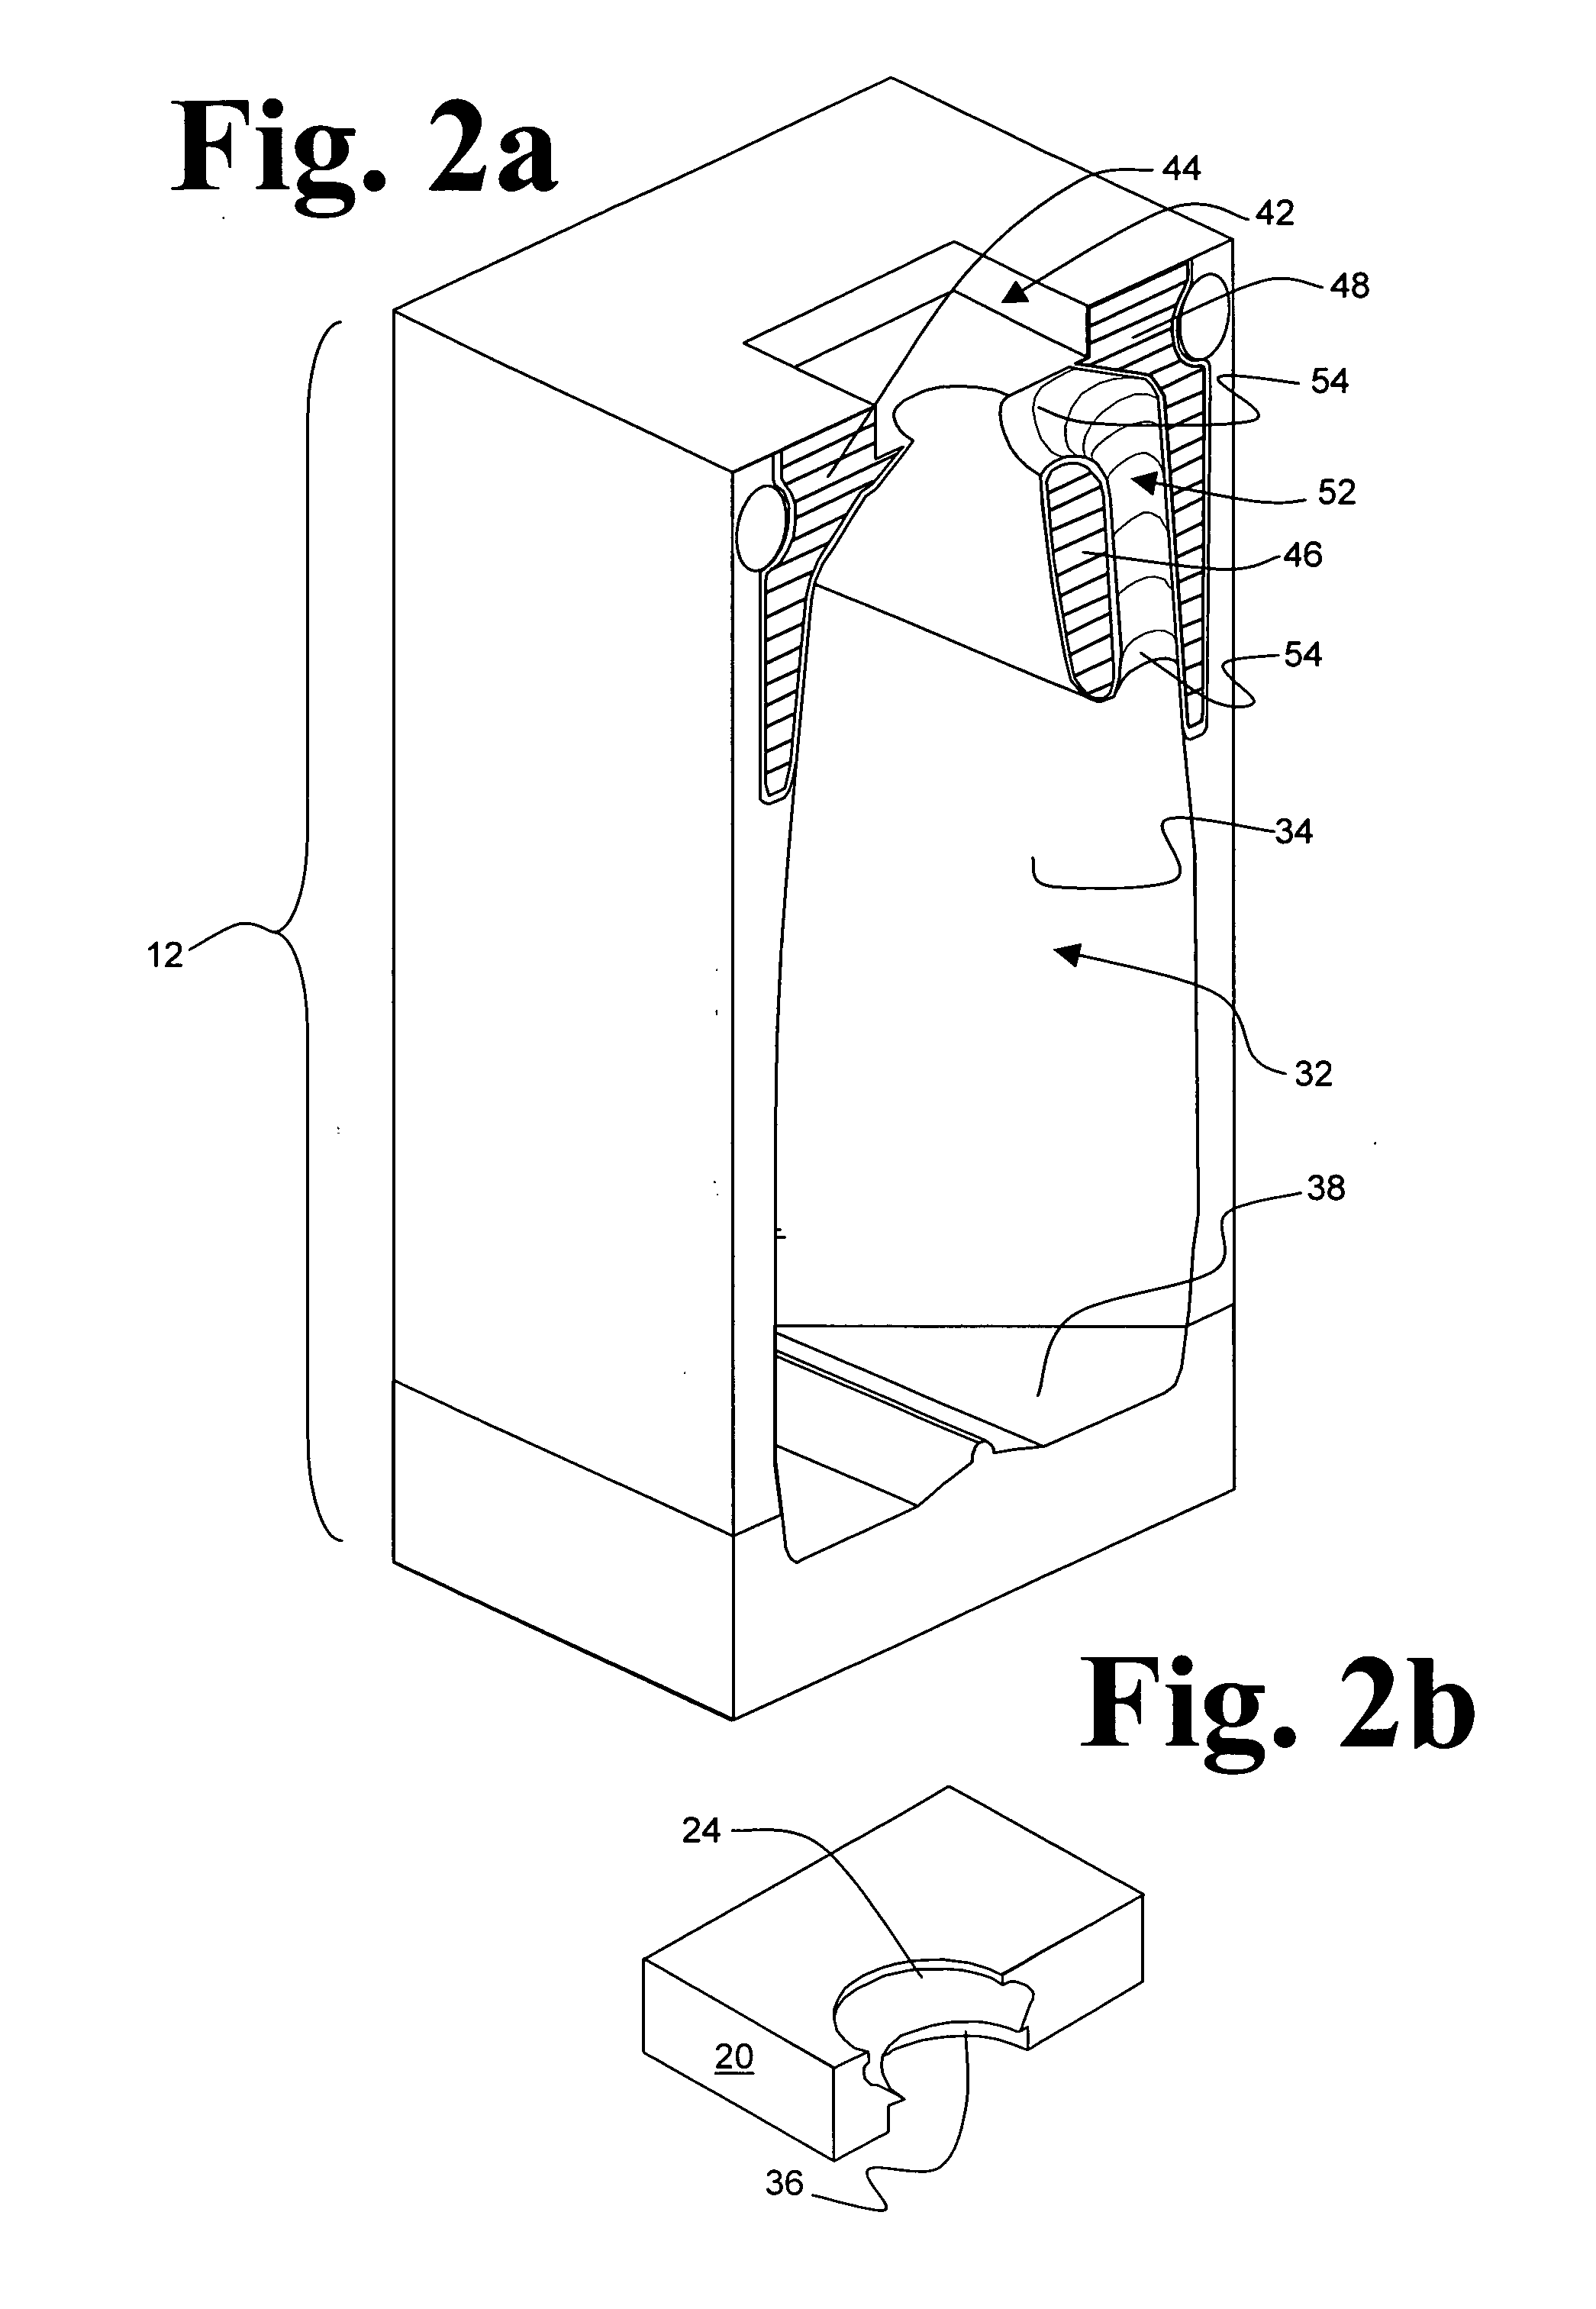 Apparatus for blow molding